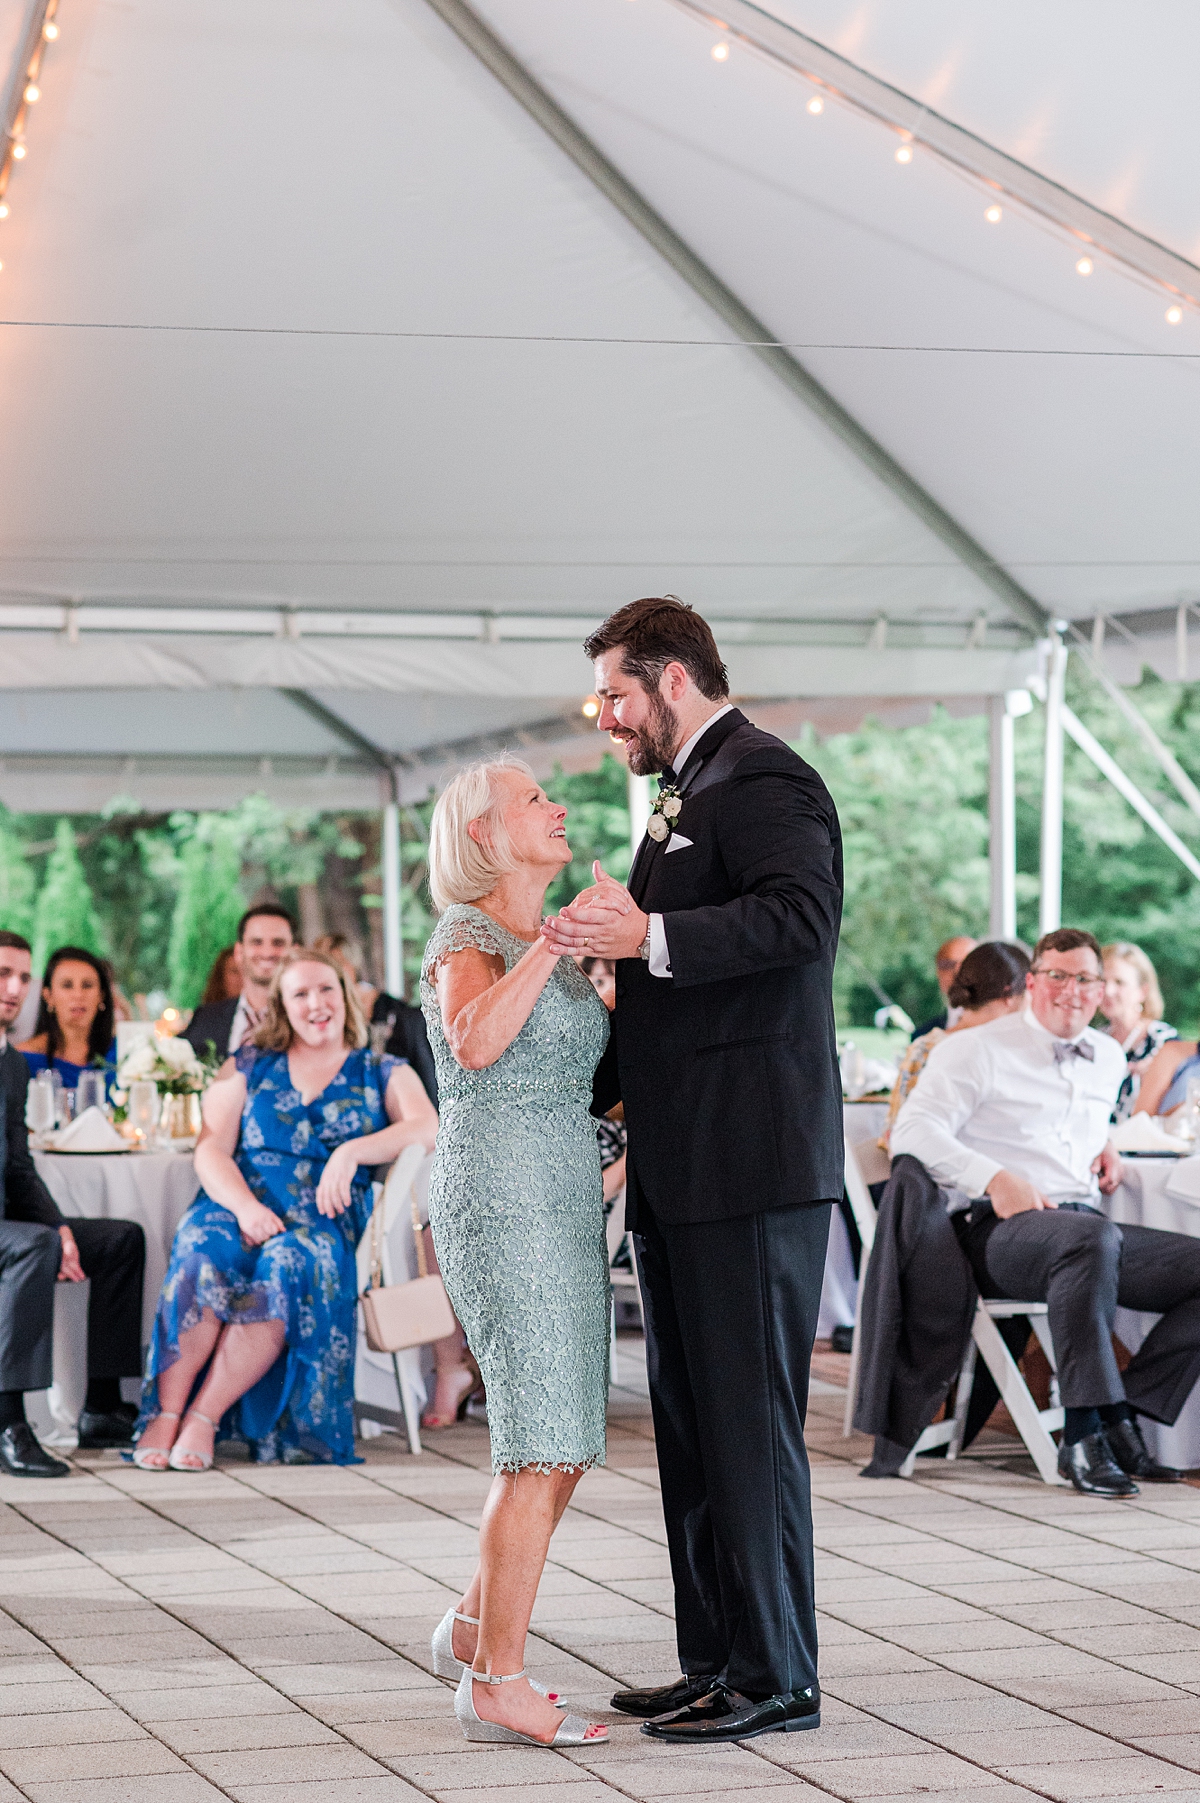 Mother Father Dance During Lewis Ginter Botanical Garden Wedding Reception. Wedding Photography by Richmond Wedding Photographer Kailey Brianne Photography. 